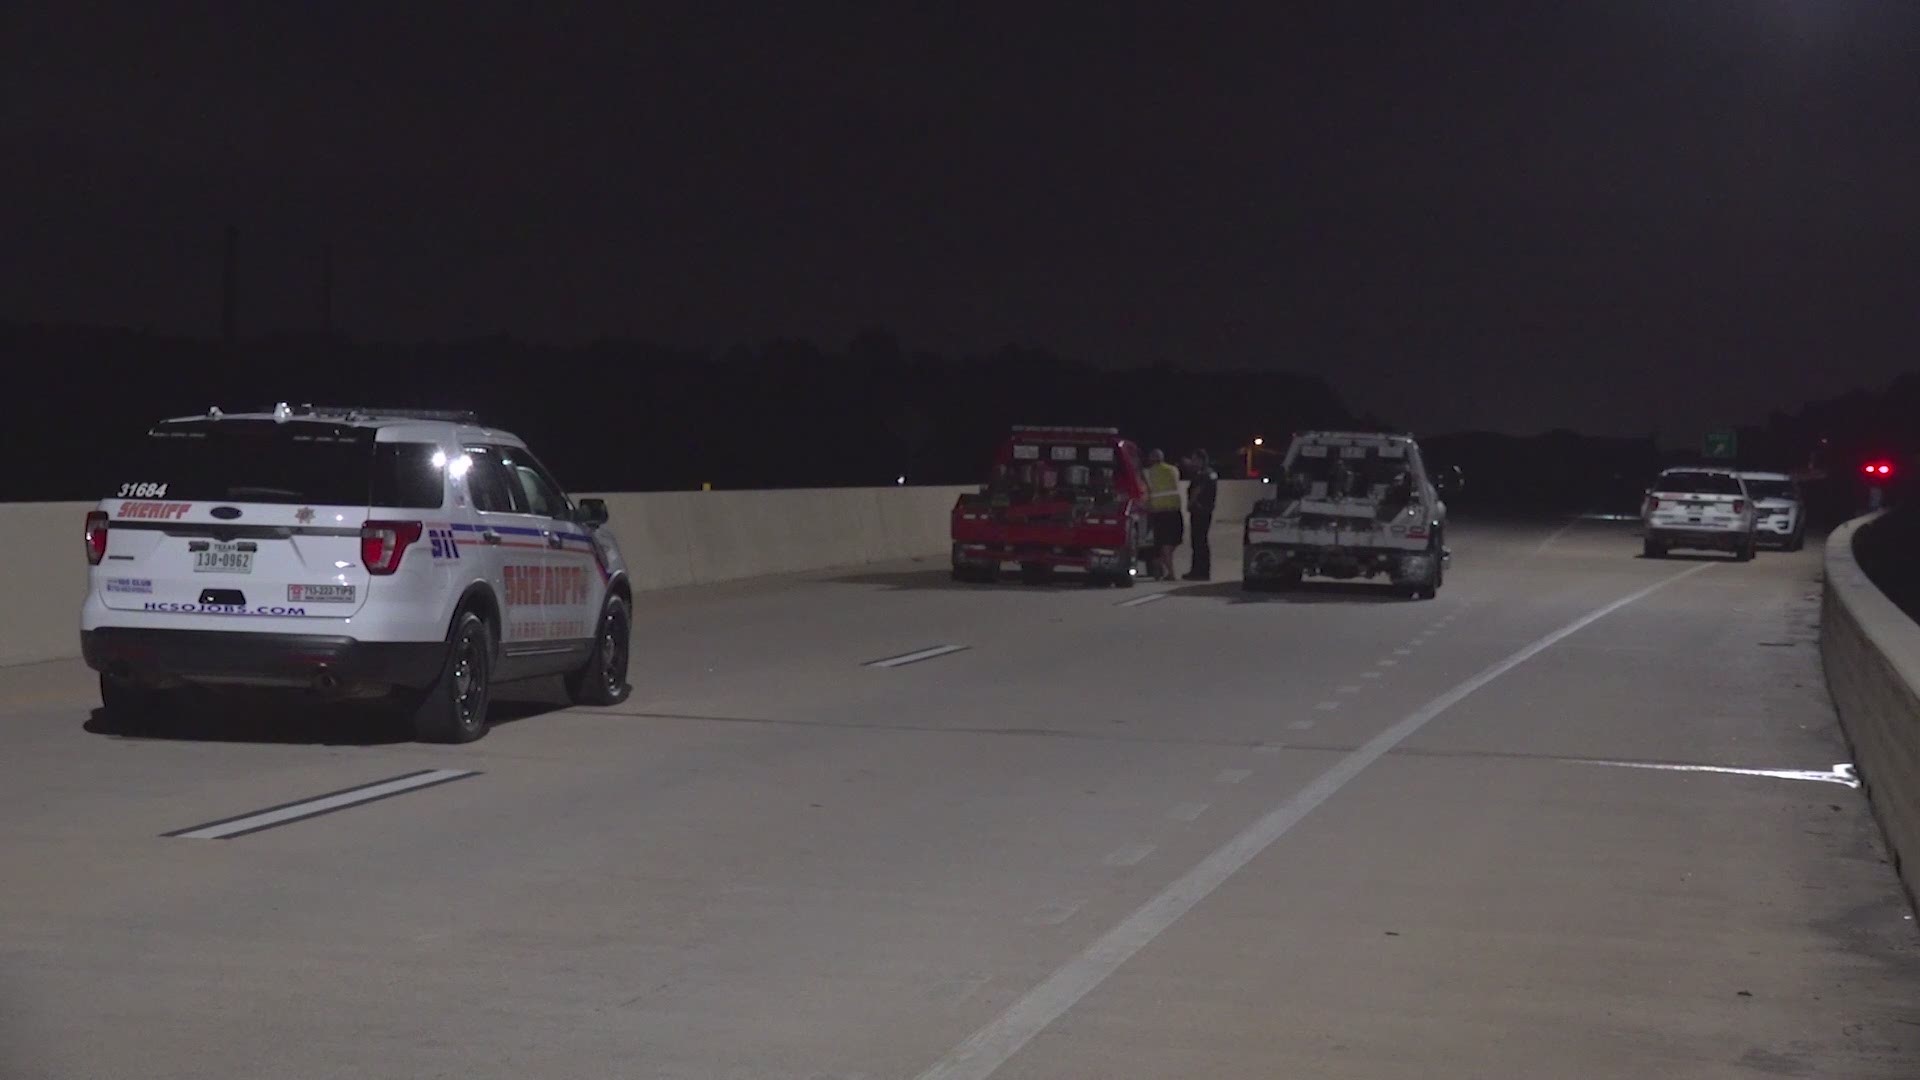 A man looking for help after his car ran out of gas on the Grand Parkway was struck and killed by a driver trying to avoid him early Saturday morning, deputies said.